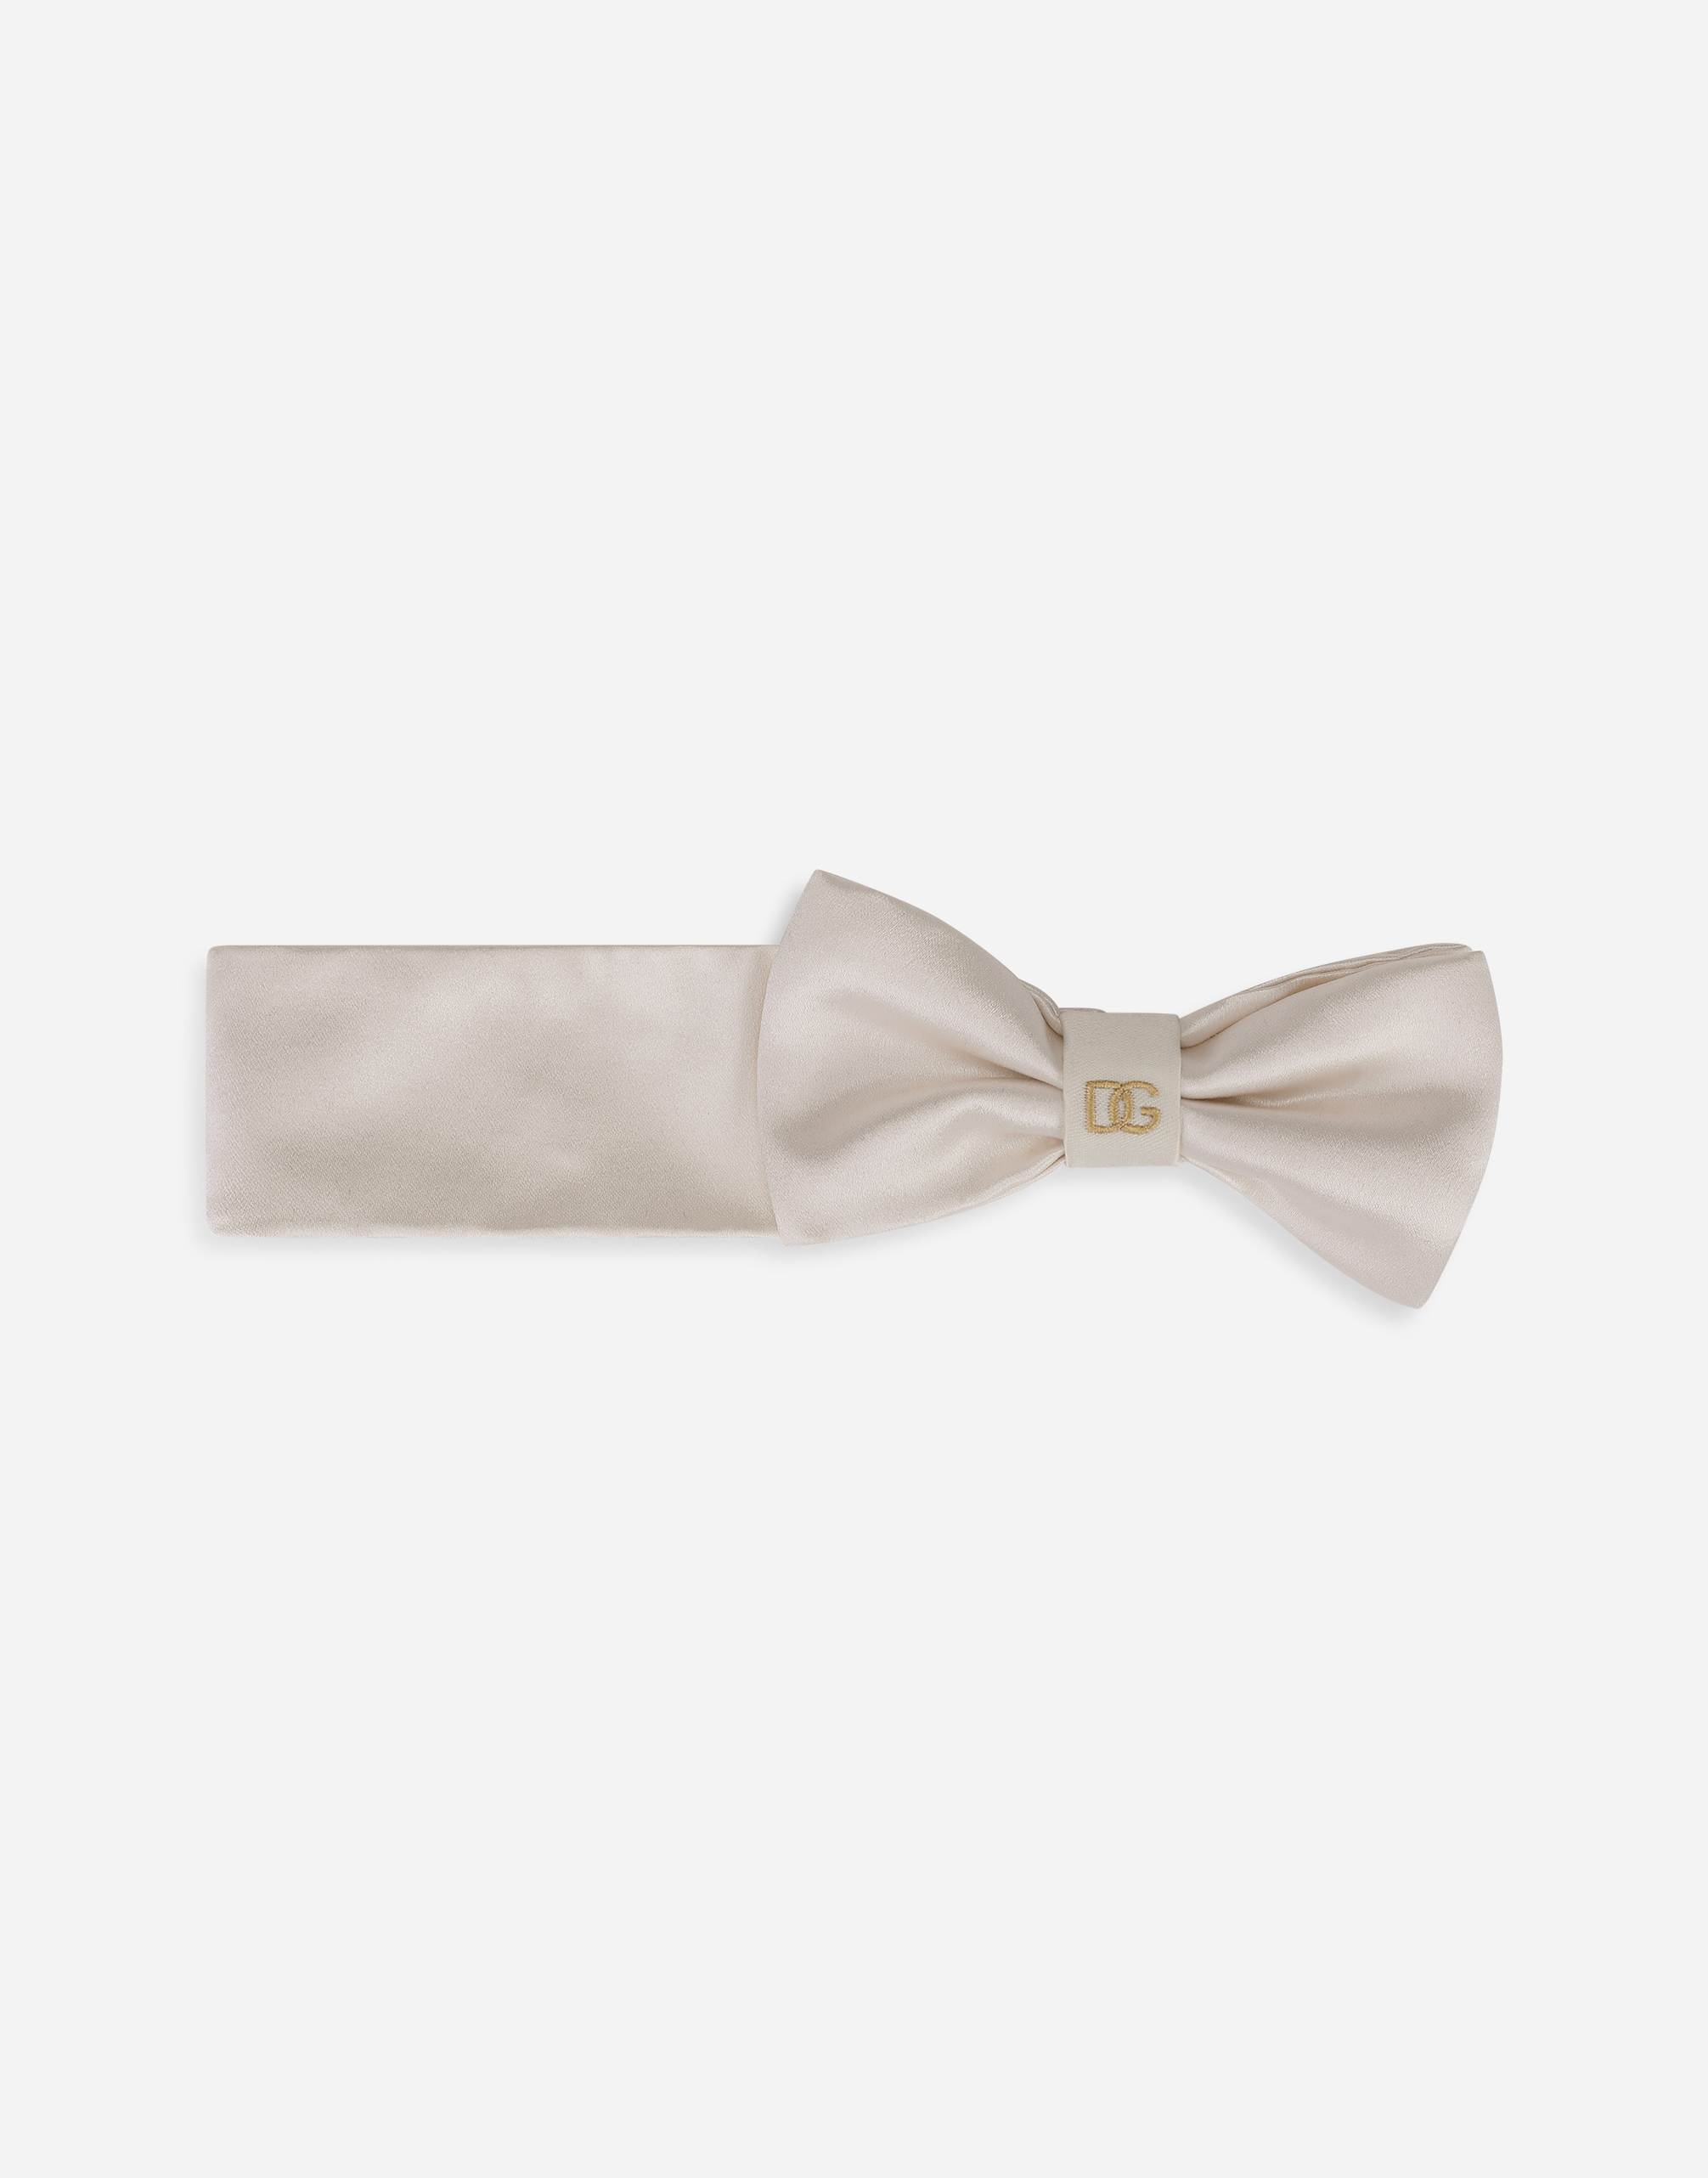 Silk duchesse headband with DG embroidery in White